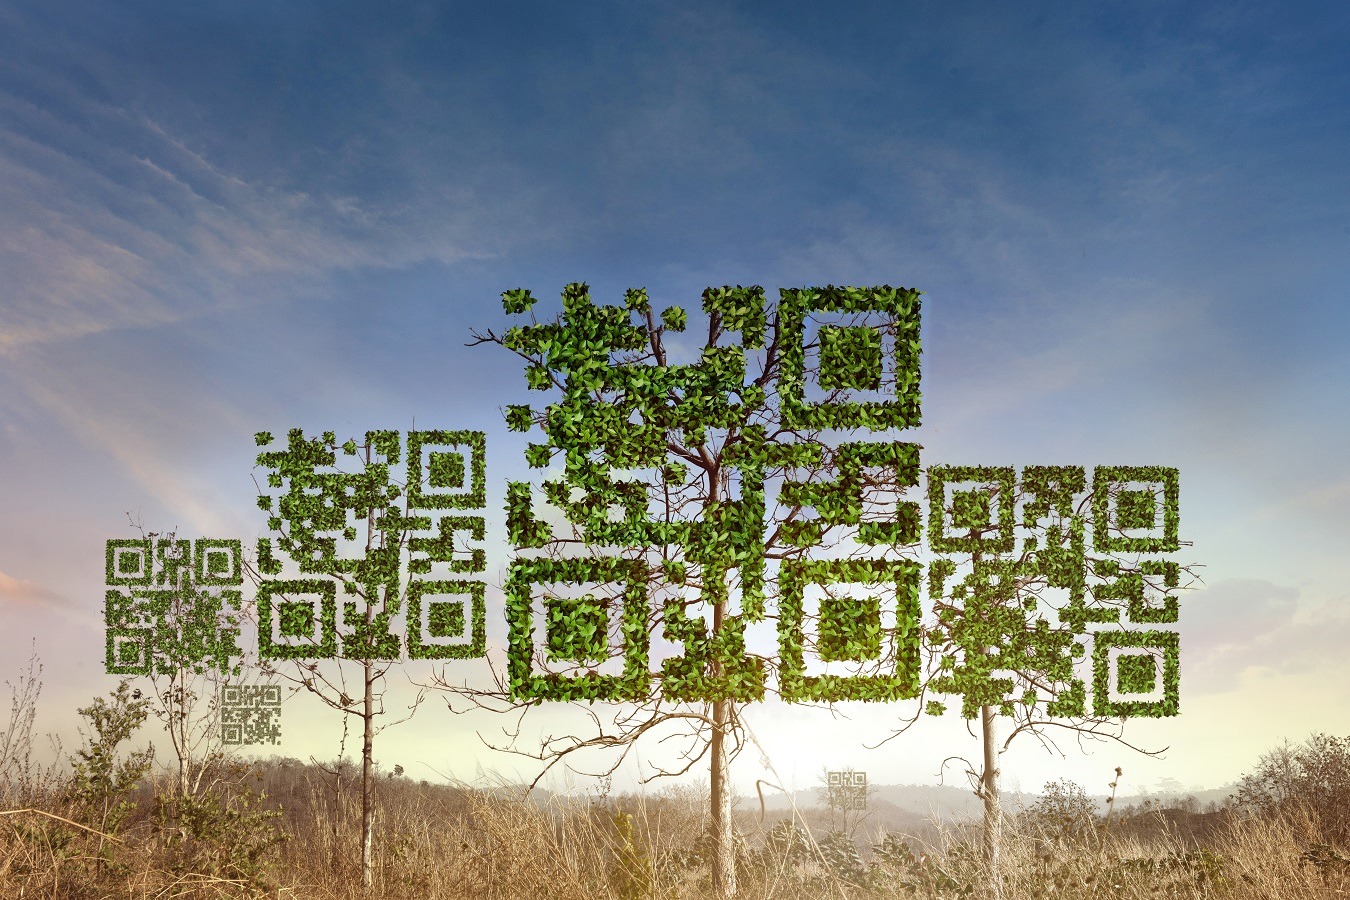 Digital trees with trees made of green QR codes against a blue sky